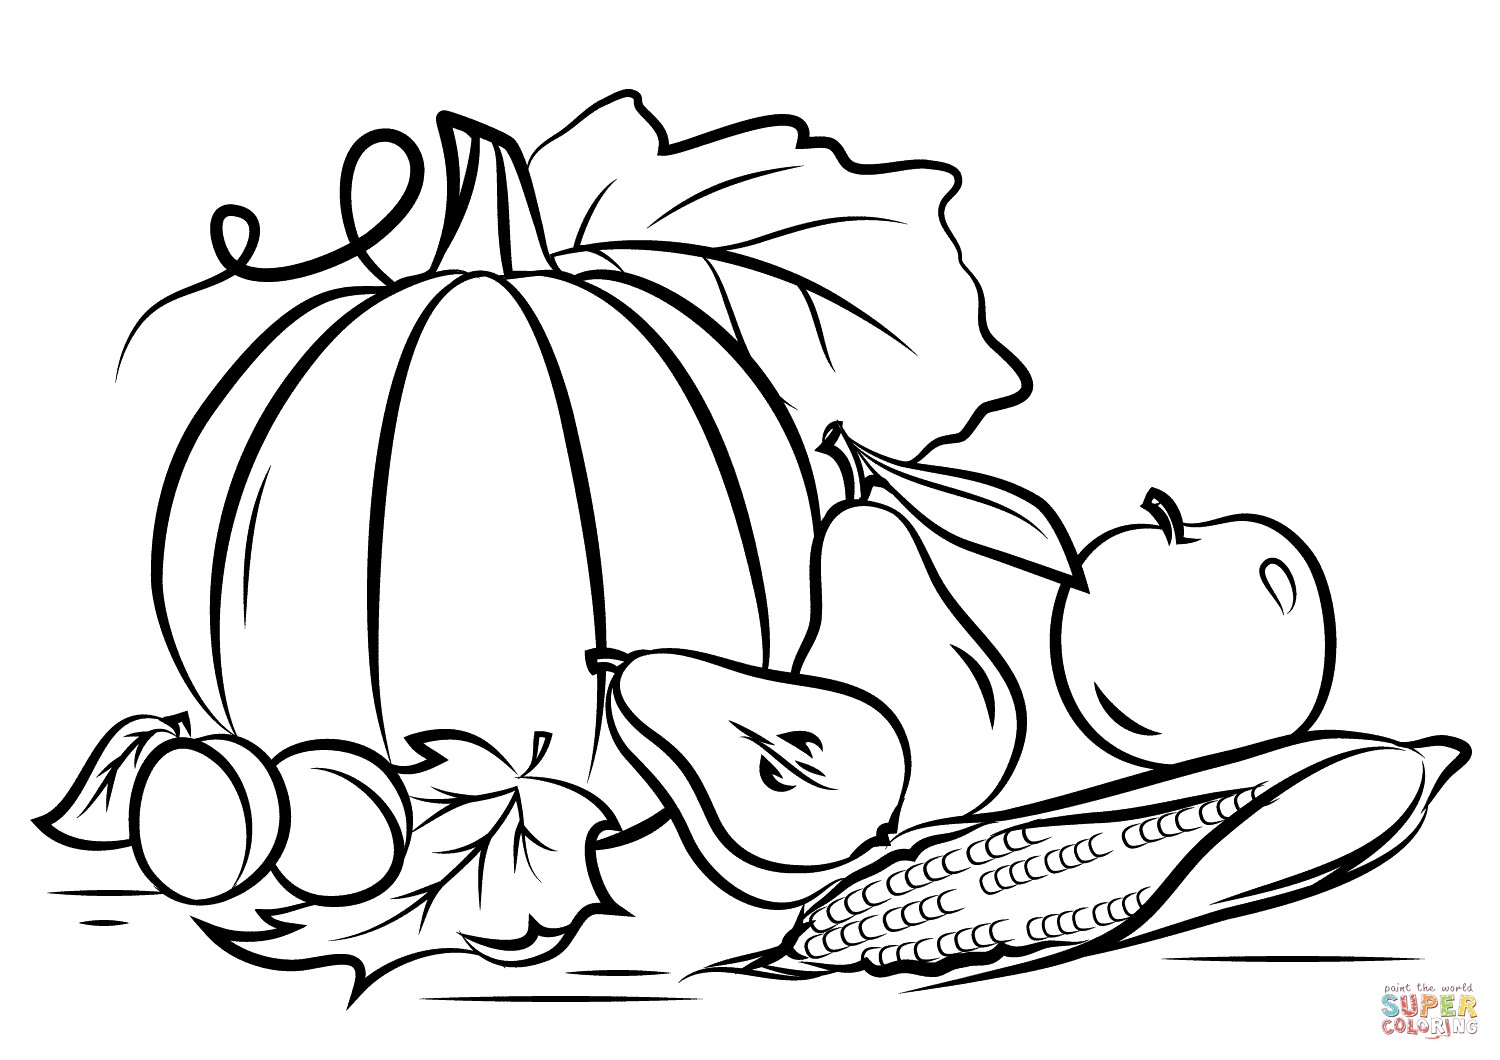 Printable Coloring Pages Fall
 Autumn Harvest coloring page